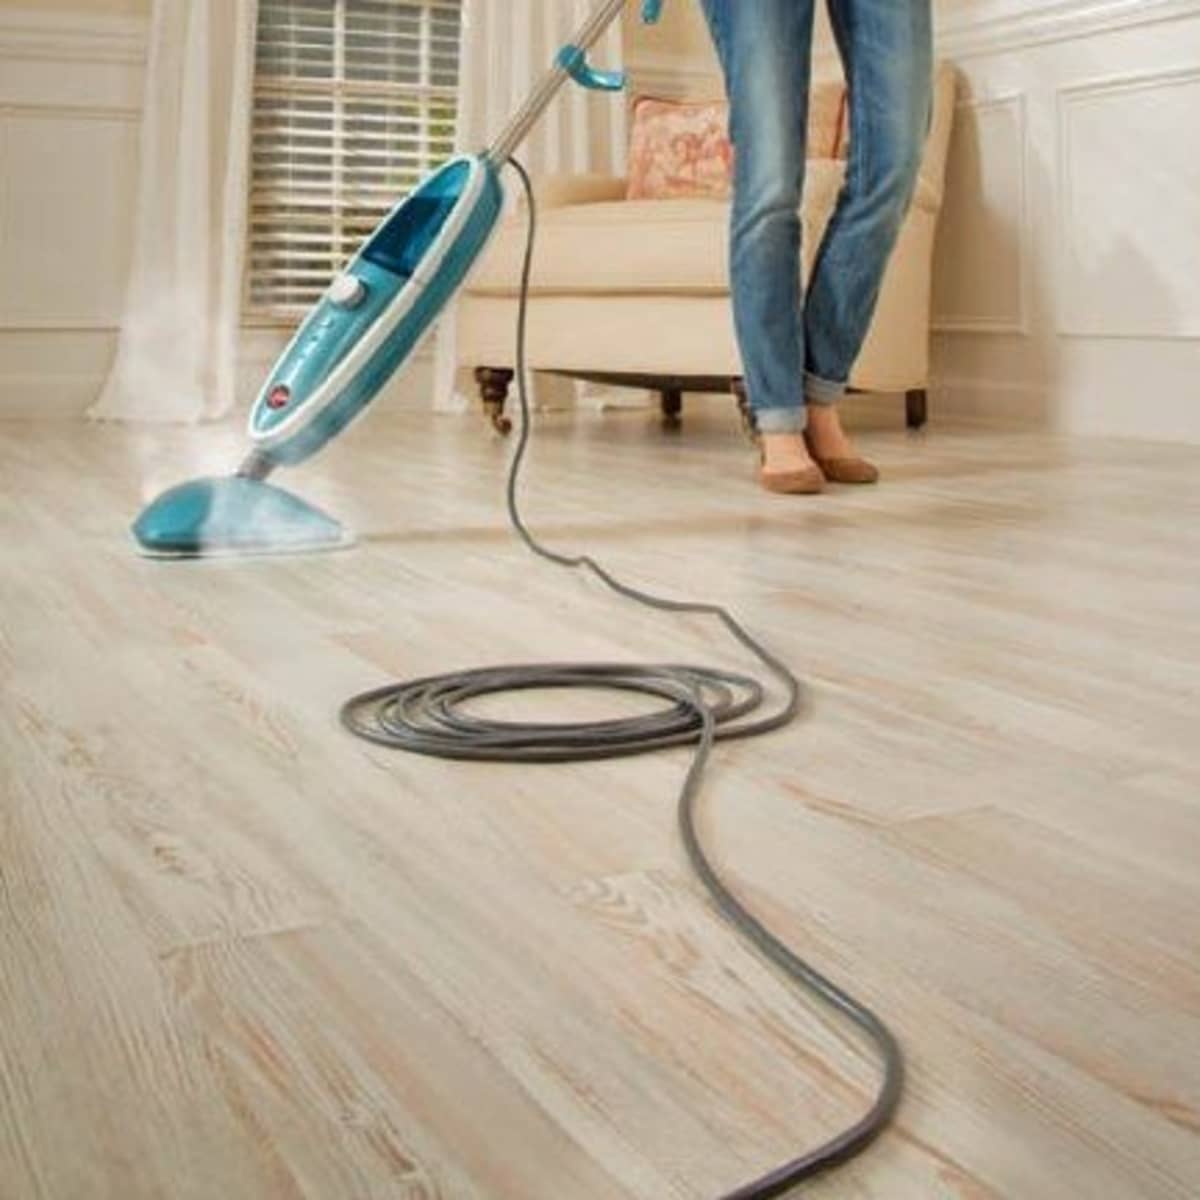 Clean Laminate Wood Floors, Can I Use Pine Sol To Clean Laminate Floors